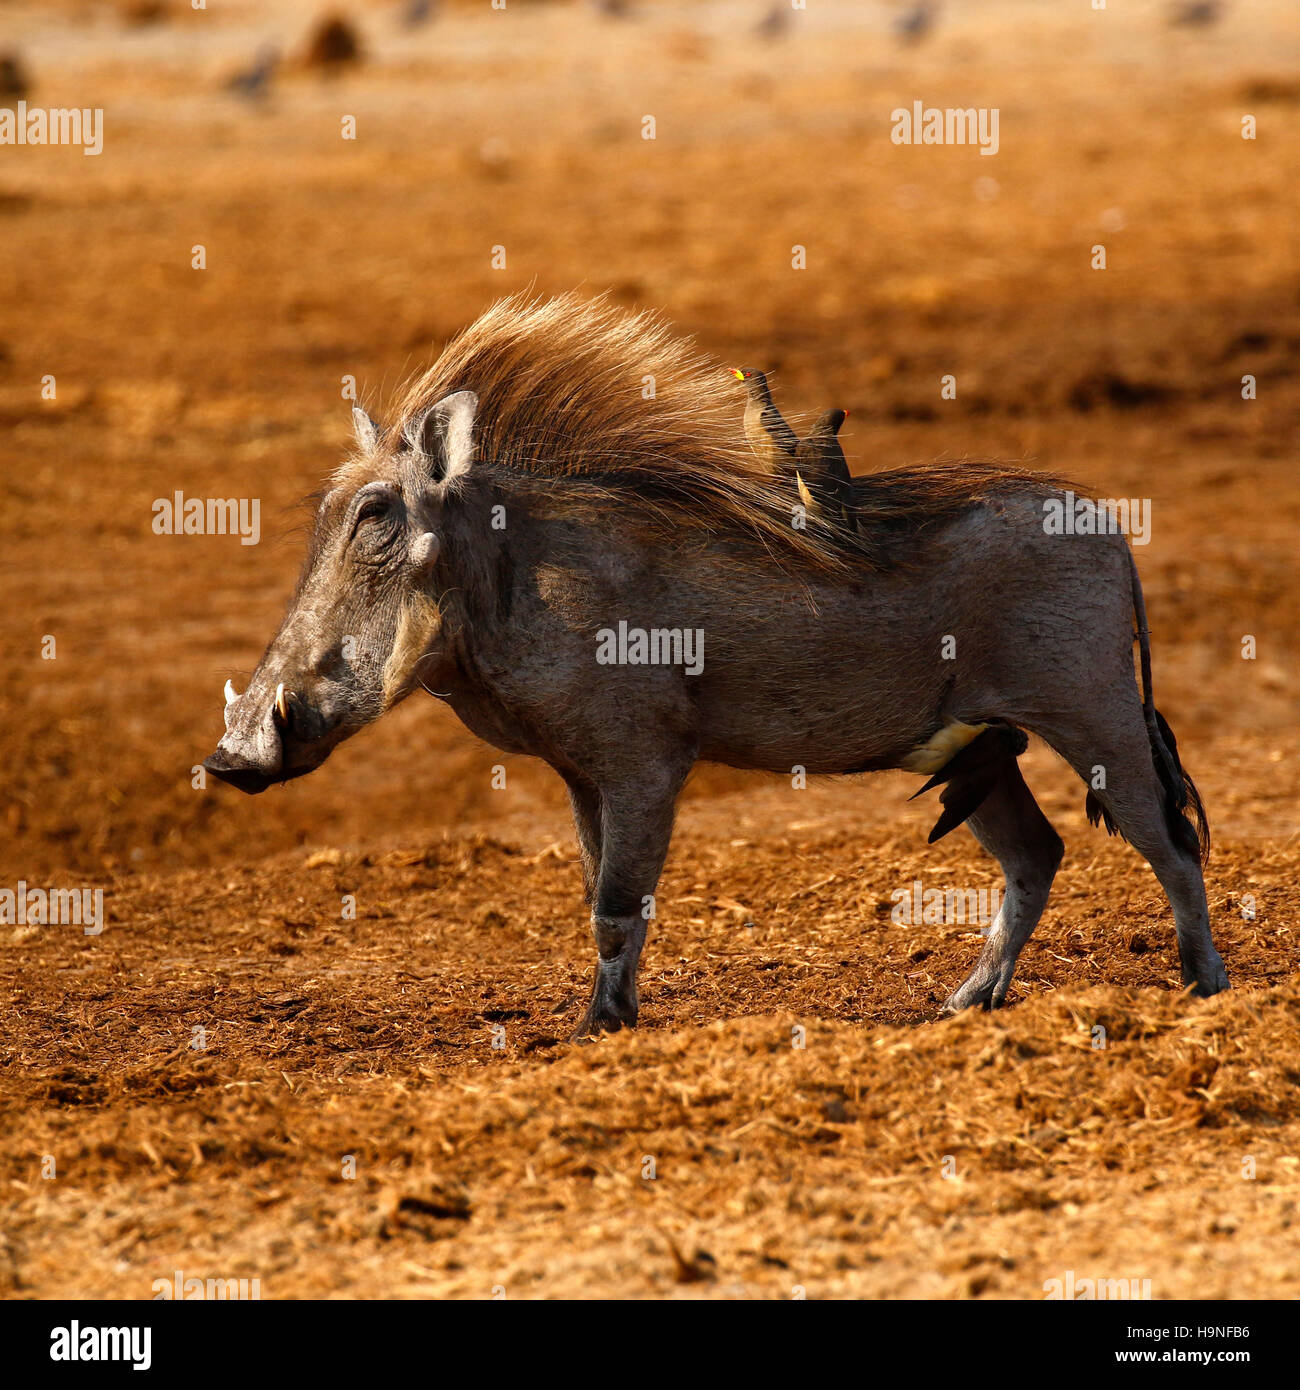 African Wart Hogs are cute little chaps these have some Oxpeckers attached to them cleaning off the bugs on their skins Stock Photo